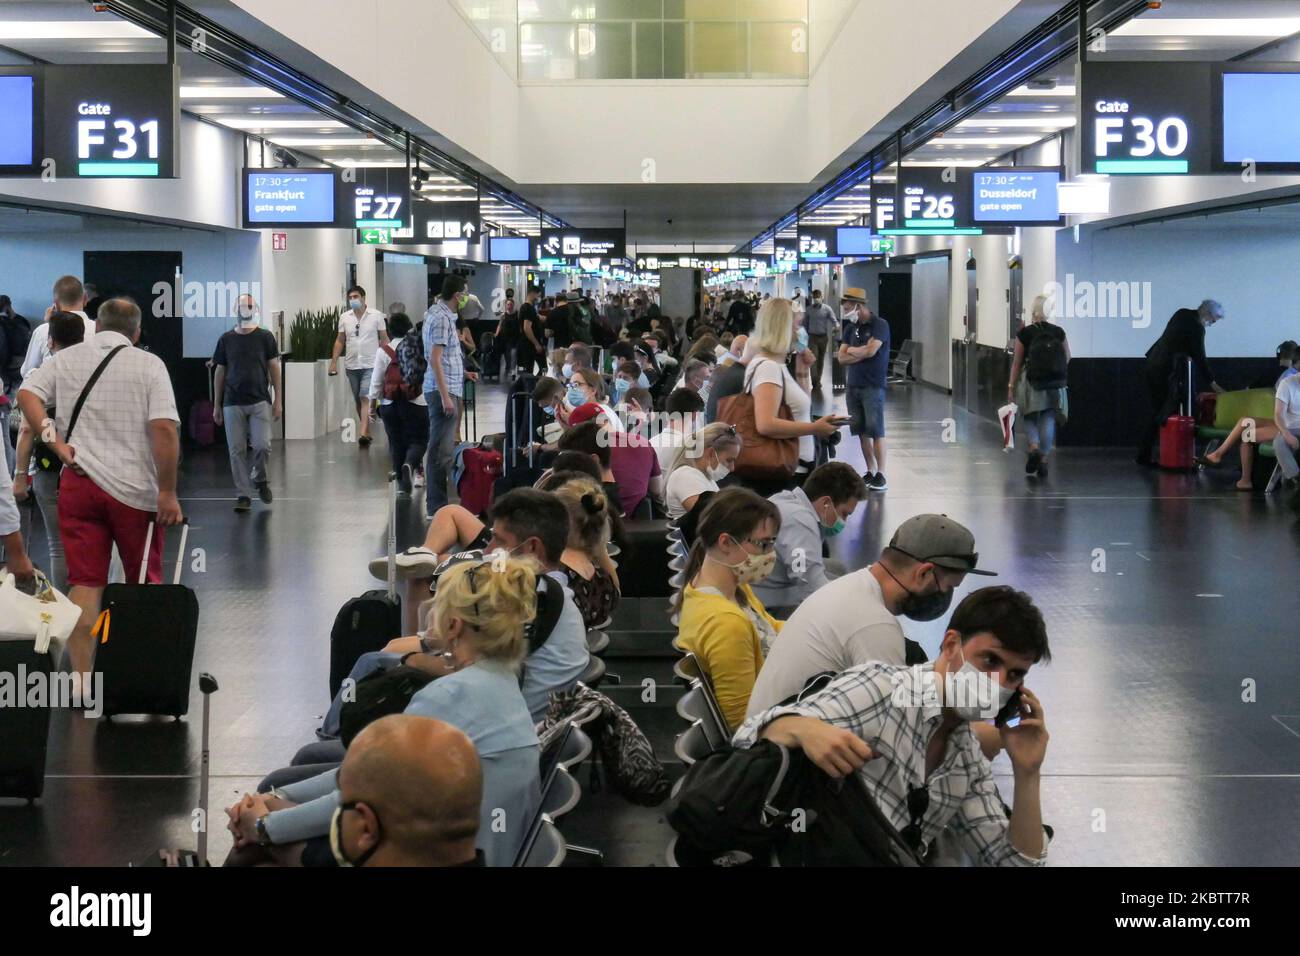 Passengers wearing facemasks, gloves and safety measures are seen on July 15, 2020 at the terminal, F Gates area of Vienna International Airport VIE LOWW - Flughafen Wien-Schwechat serving the Austrian Capital but also Bratislava as it is 55km away from the Slovak city during the Covid-19 Coronavirus pandemic era with social distancing measures and disinfecting hand sanitizer everywhere afther the lockdown period. On July 1, Austria issues travel warning for six Balkan states countries, Serbia, Montenegro, Bosnia Herzegovina, North Macedonia, Albania and Kosovo. Passengers traveling from those Stock Photo